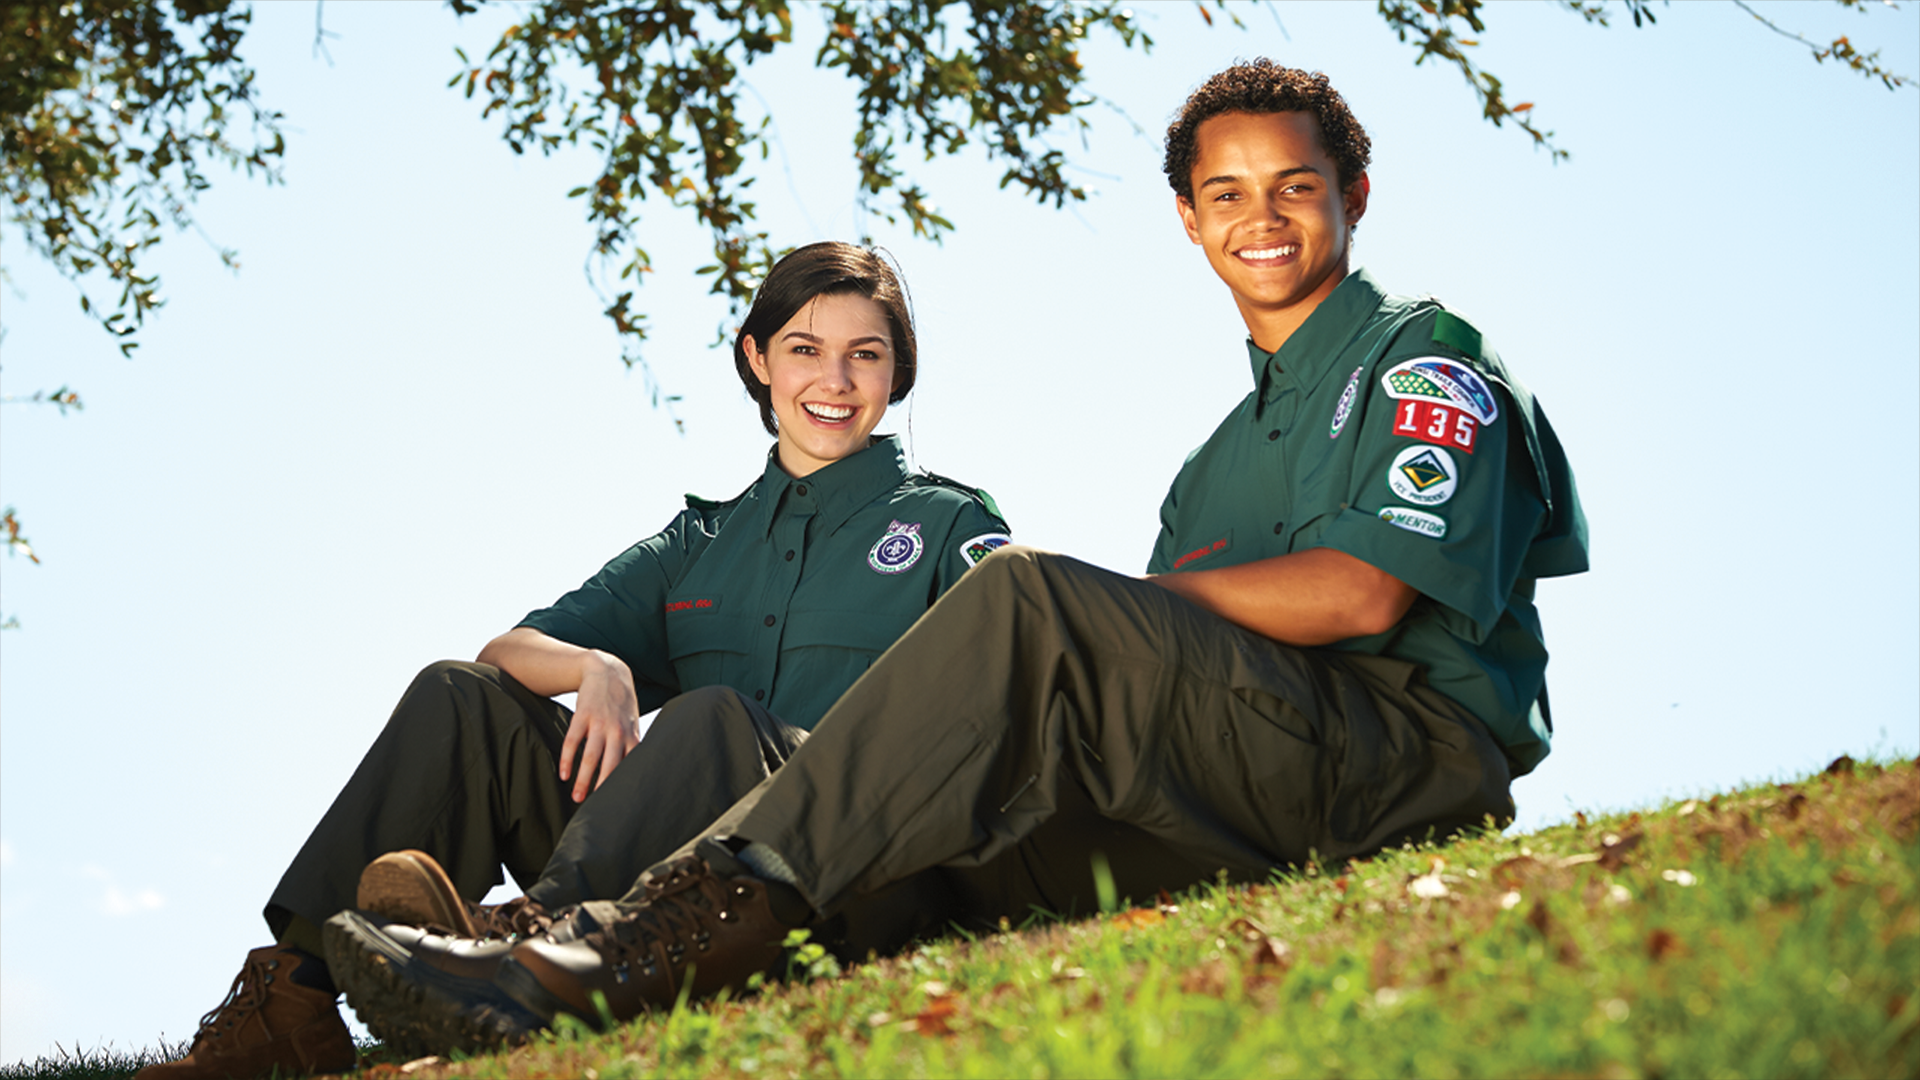 Two young adults wearing Venturing uniforms, one female and one male, are smiling at the camera while sitting on a hill 